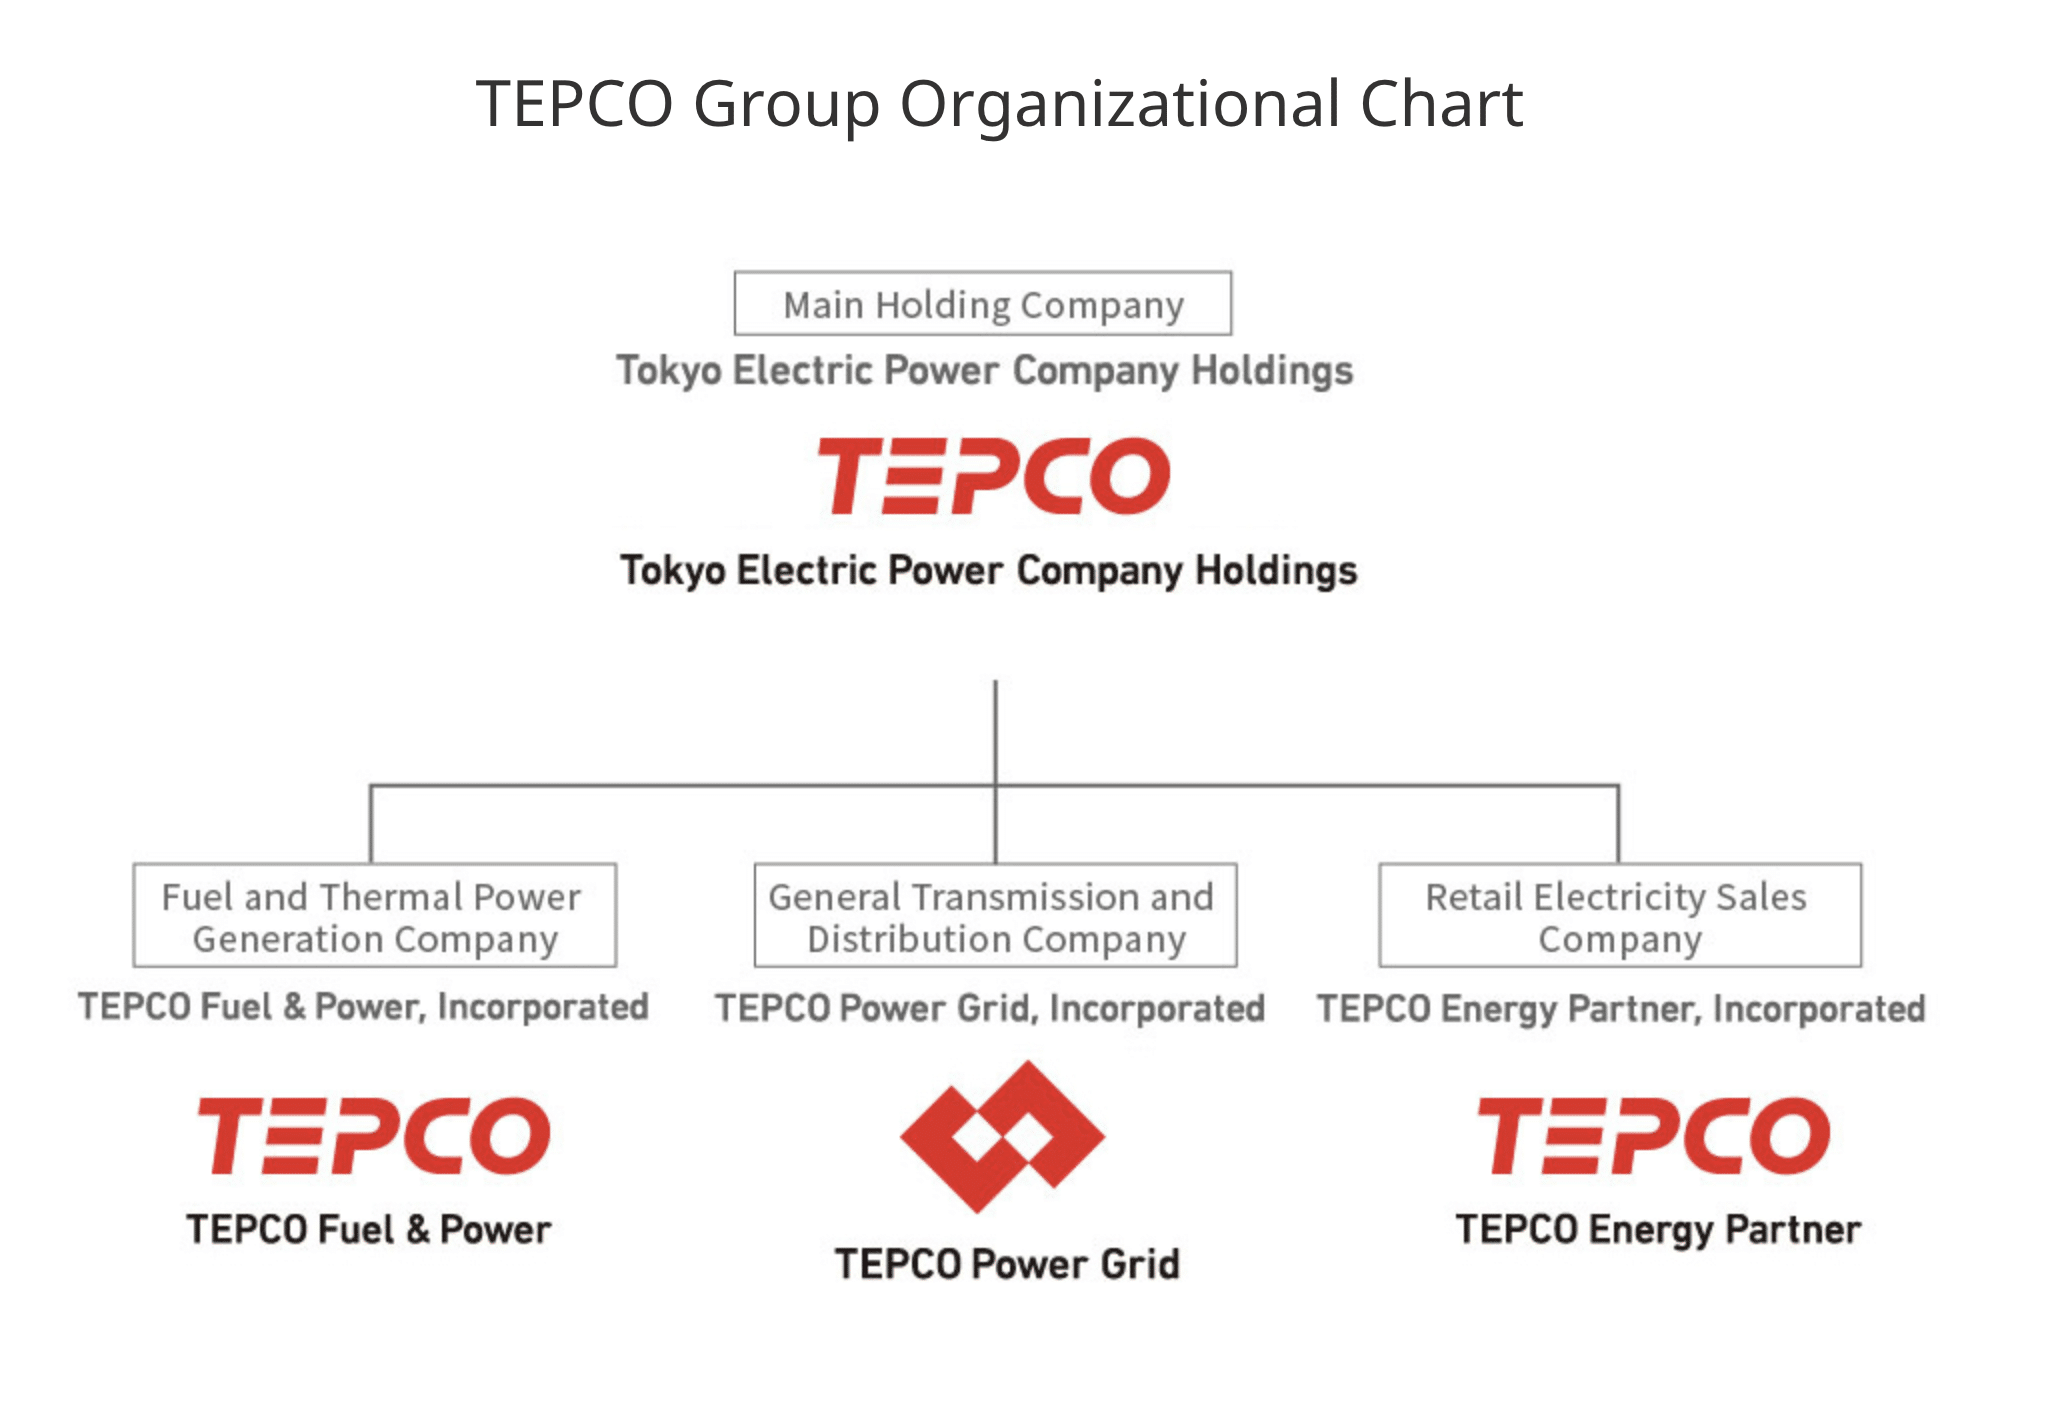 Highly enriched shareholders mean disasters down the line: Why utilities like TEPCO need new corporate governance